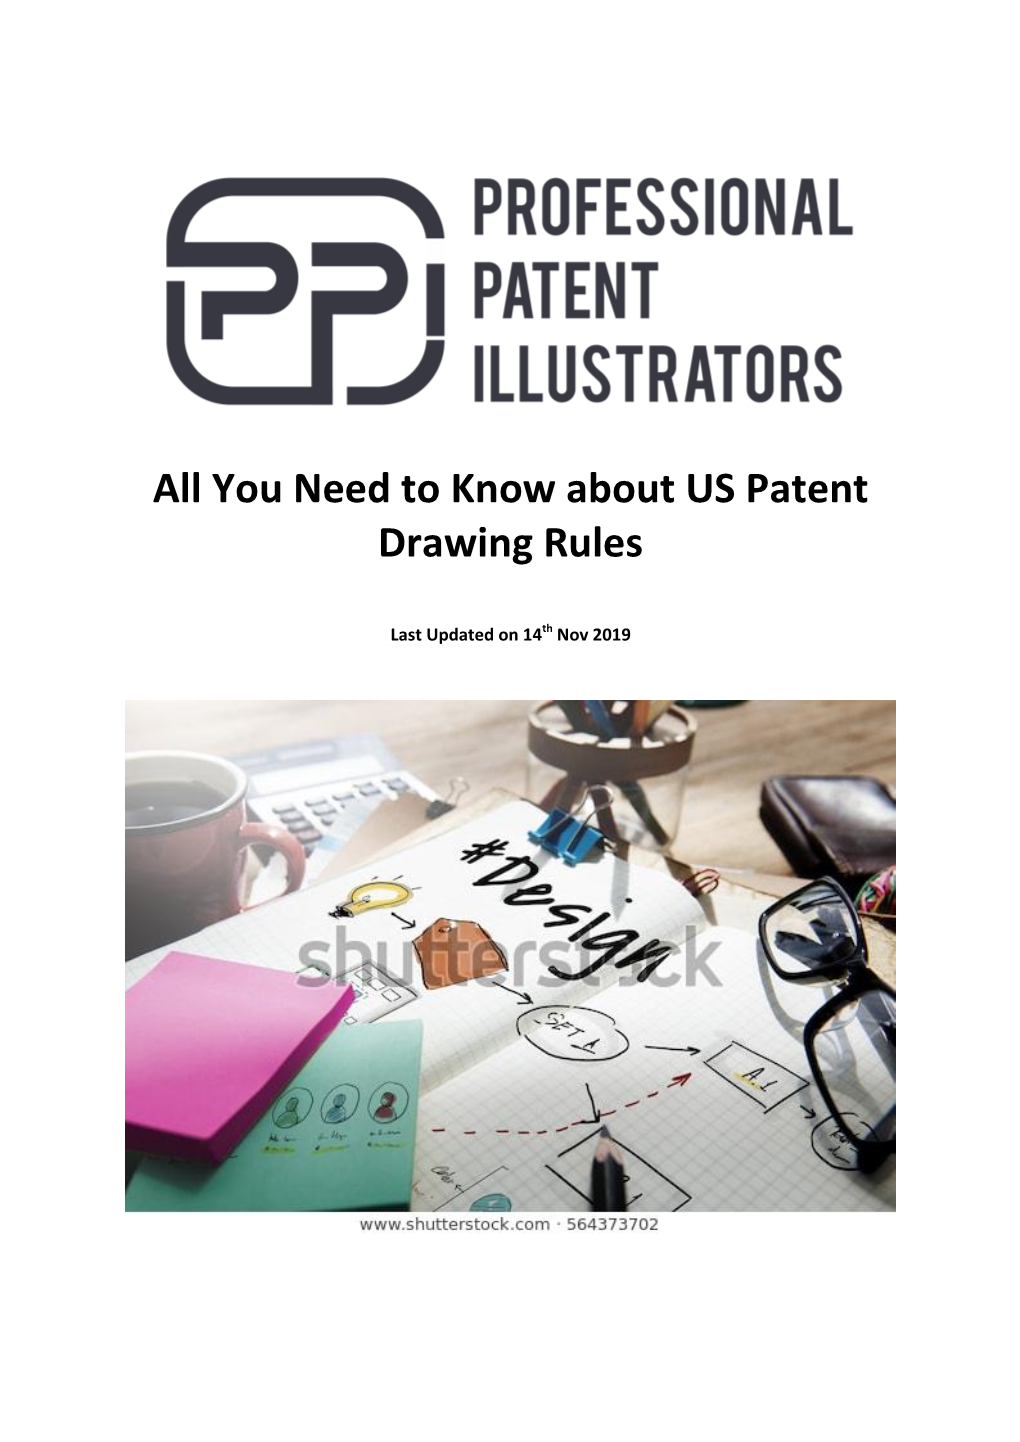 All You Need to Know About US Patent Drawing Rules